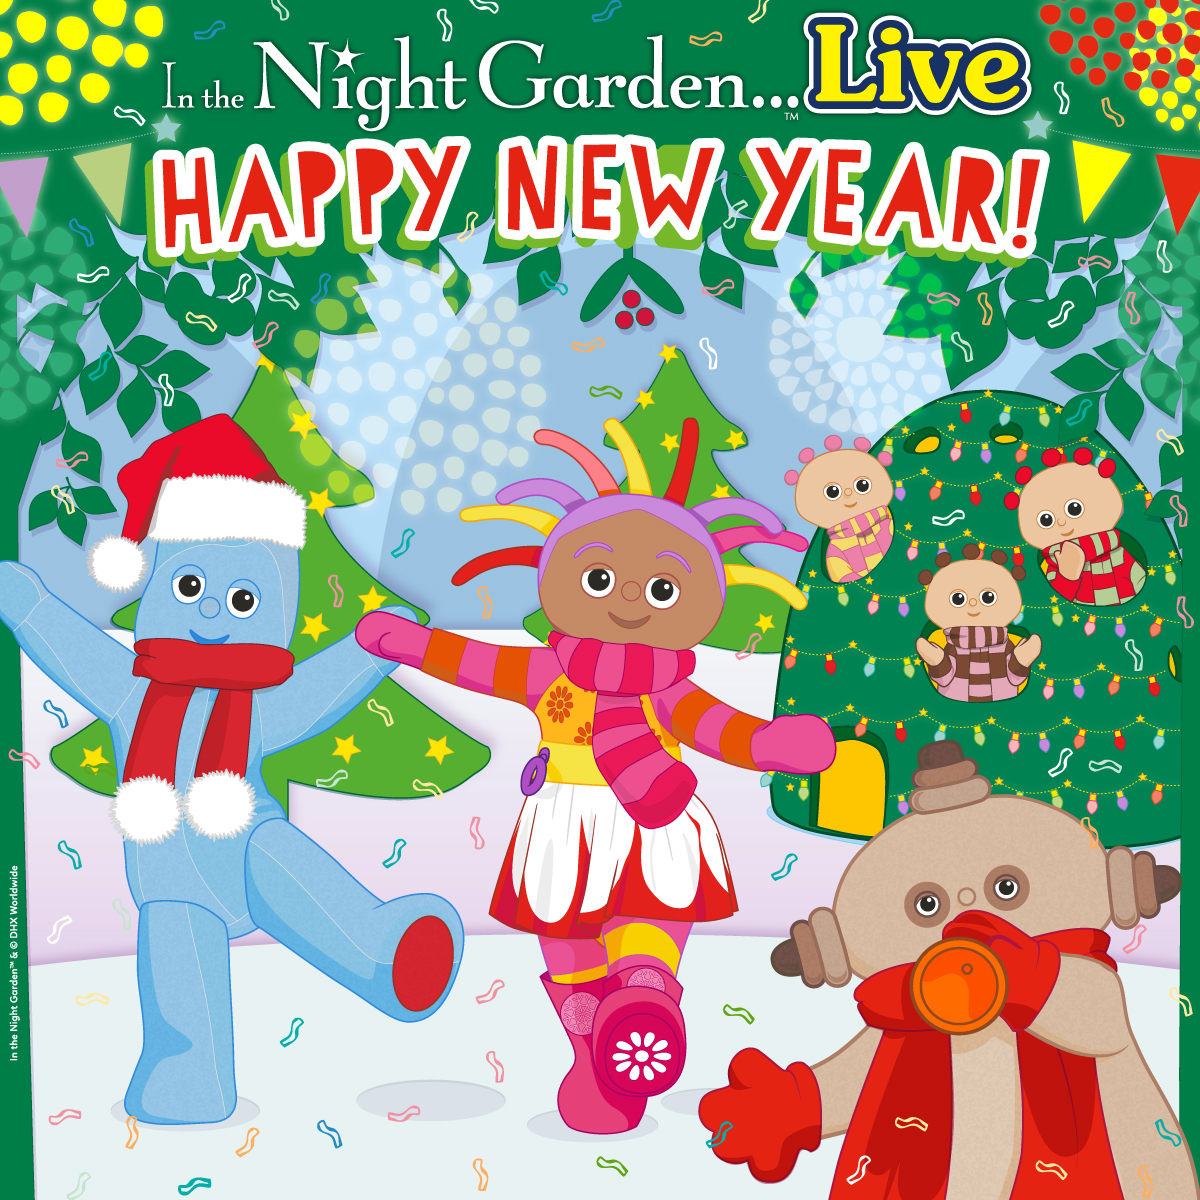 🎉 Happy New Year! We are excited that our tour dates for #IntheNightGardenLive UK theatre tour 2024 are being decided right now! As soon as we know all the venues Igglepiggle & friends will be visiting we’ll let you know. Sign up for our newsletter at ➡️ nightgardenlive.com/sign-up